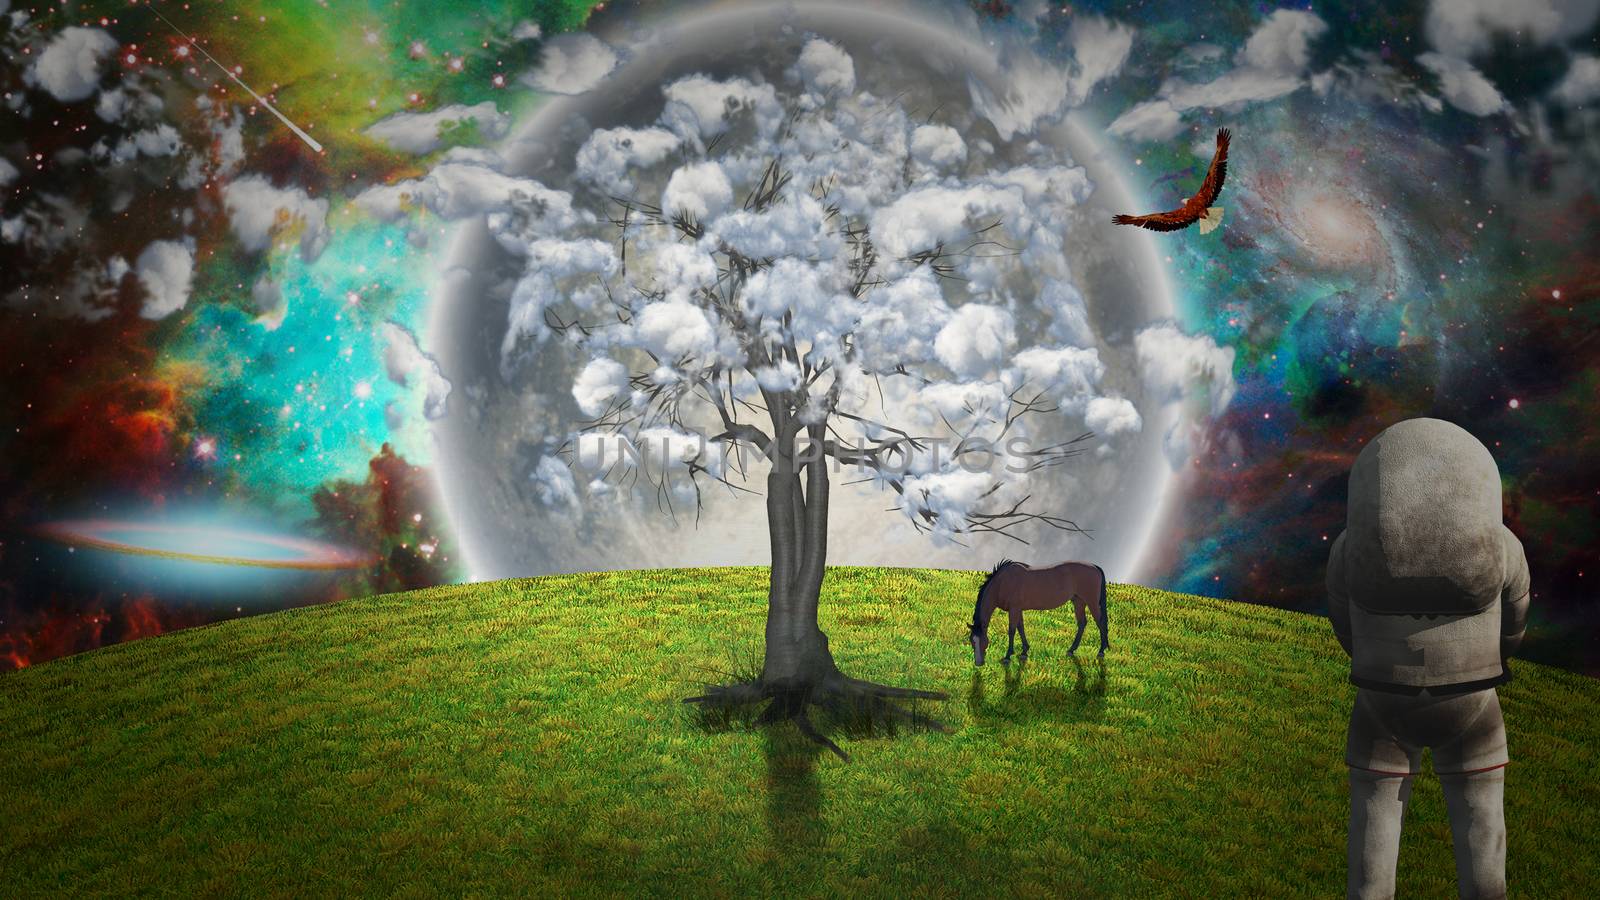 Surreal meadow with horse, astronaut and tree with clouds